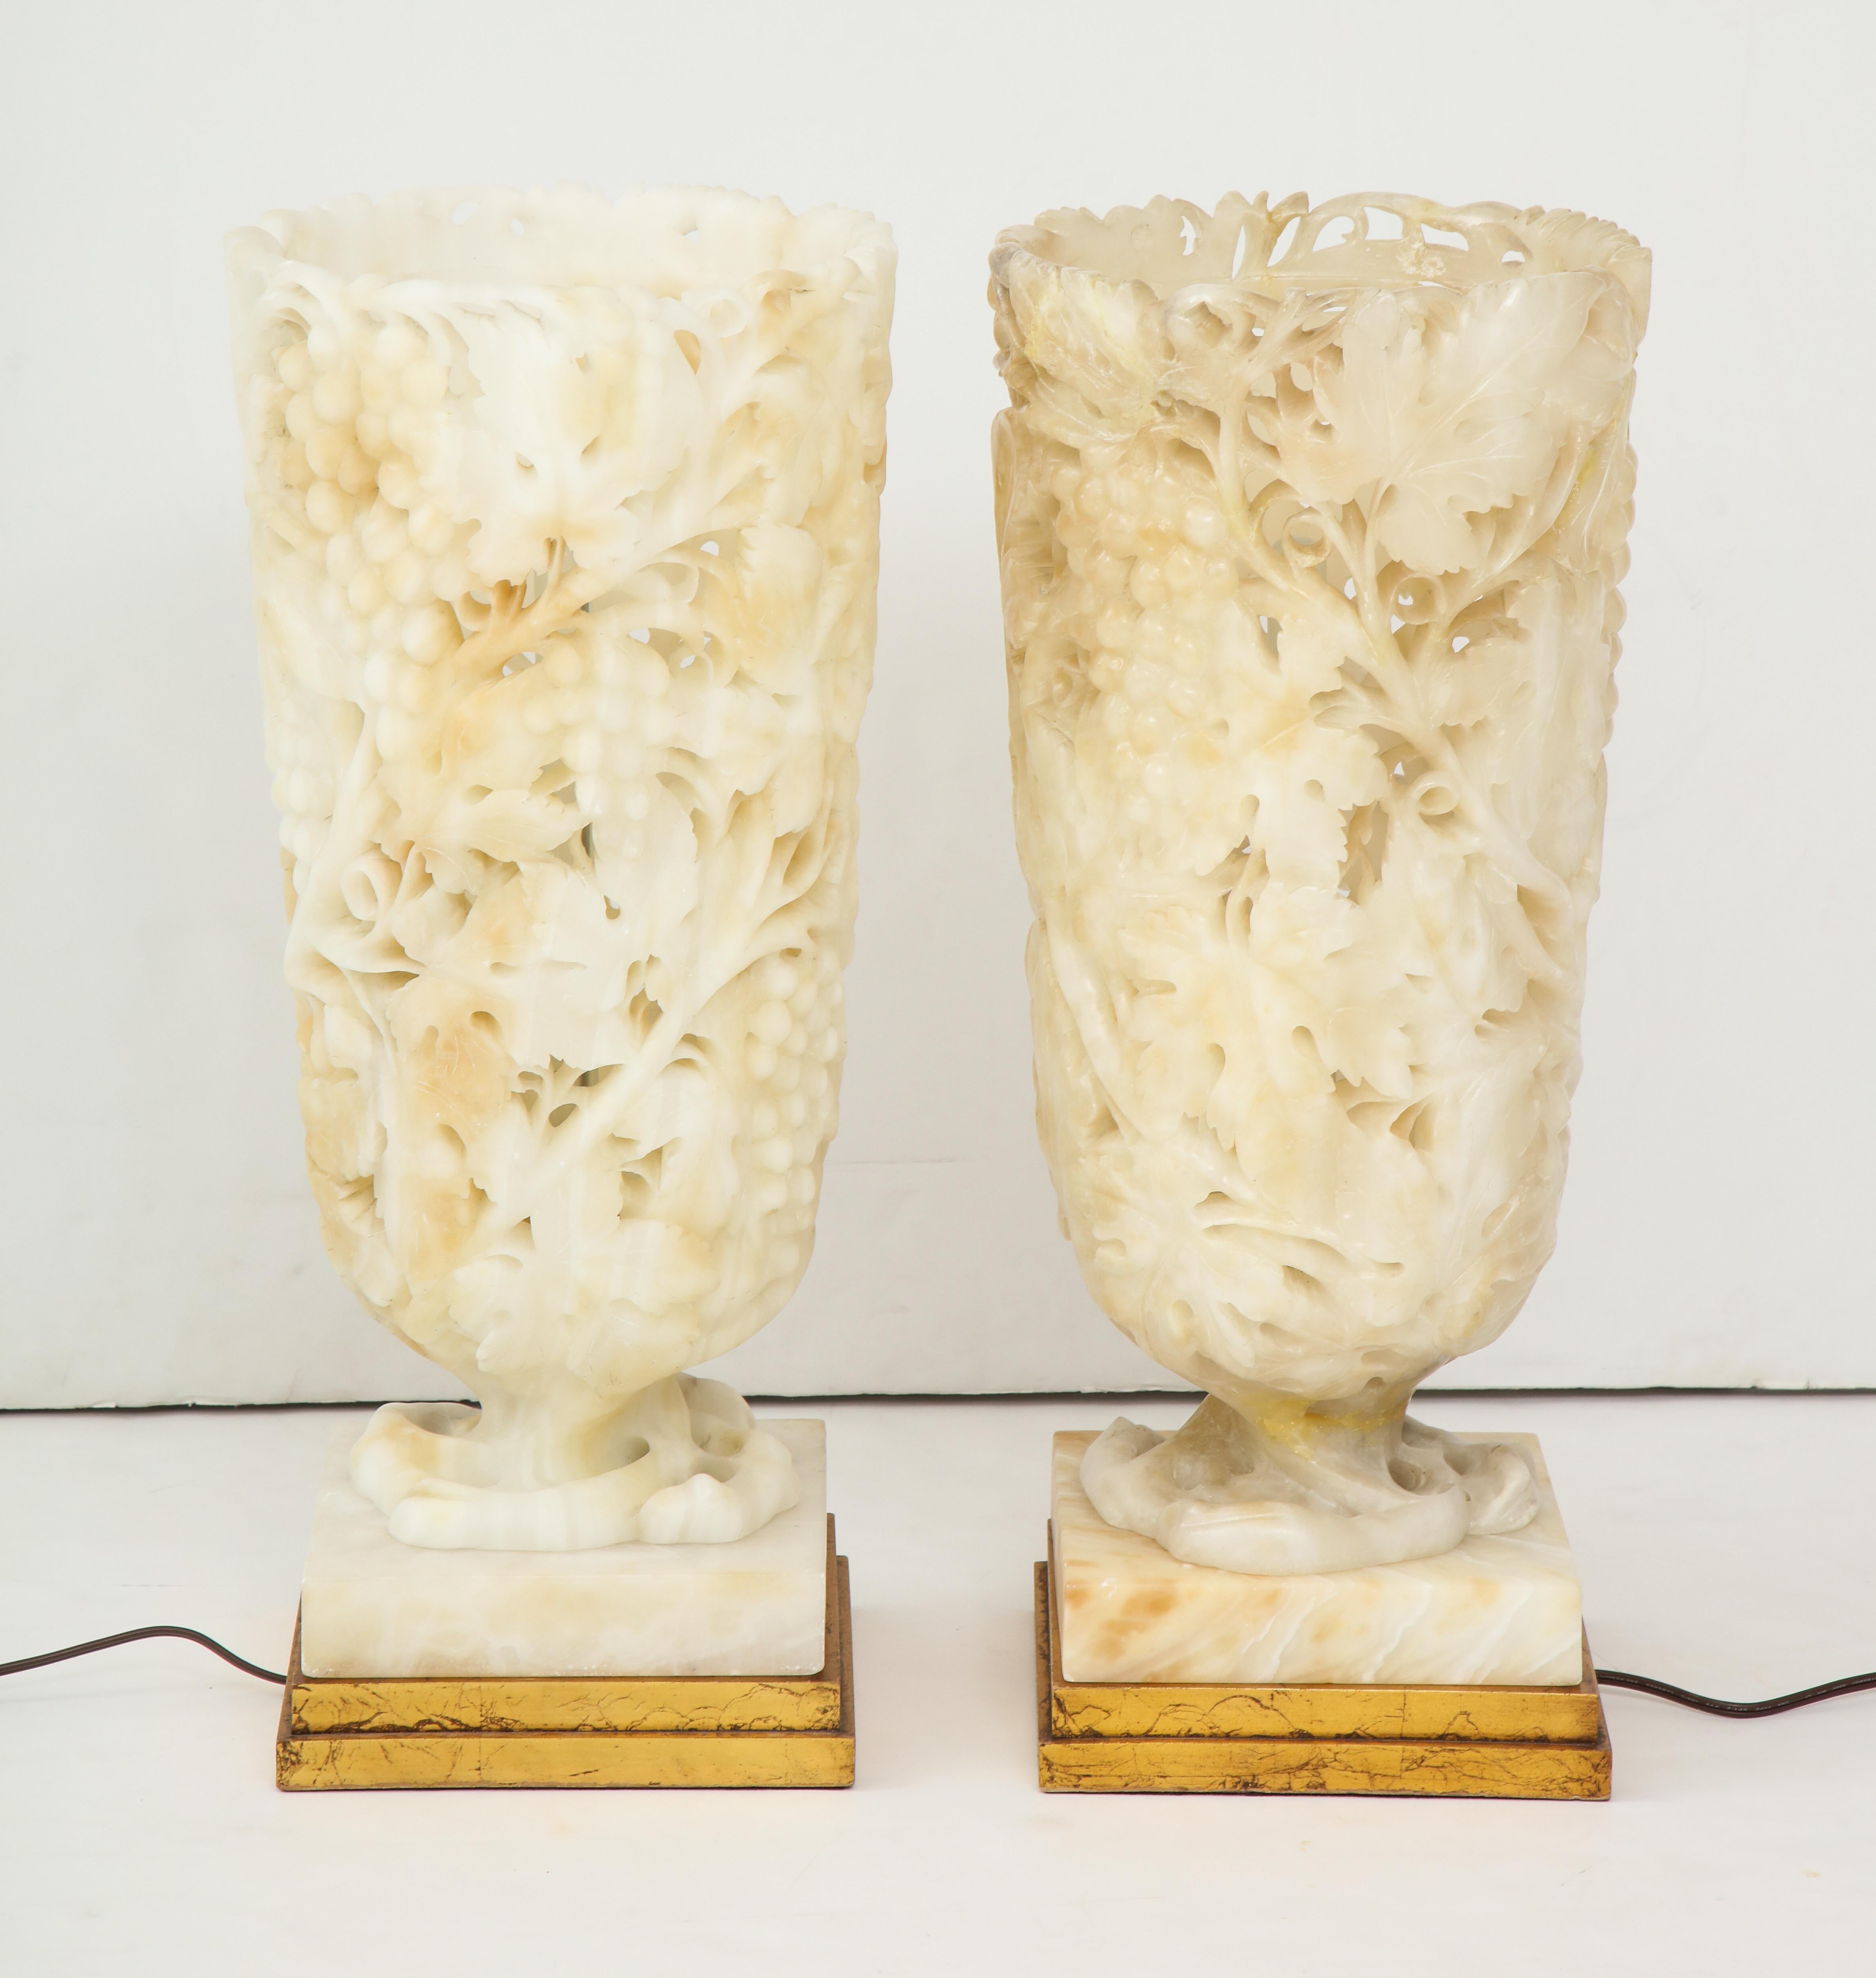 Exquisite Pair of Large Carved Alabaster Lamps 2